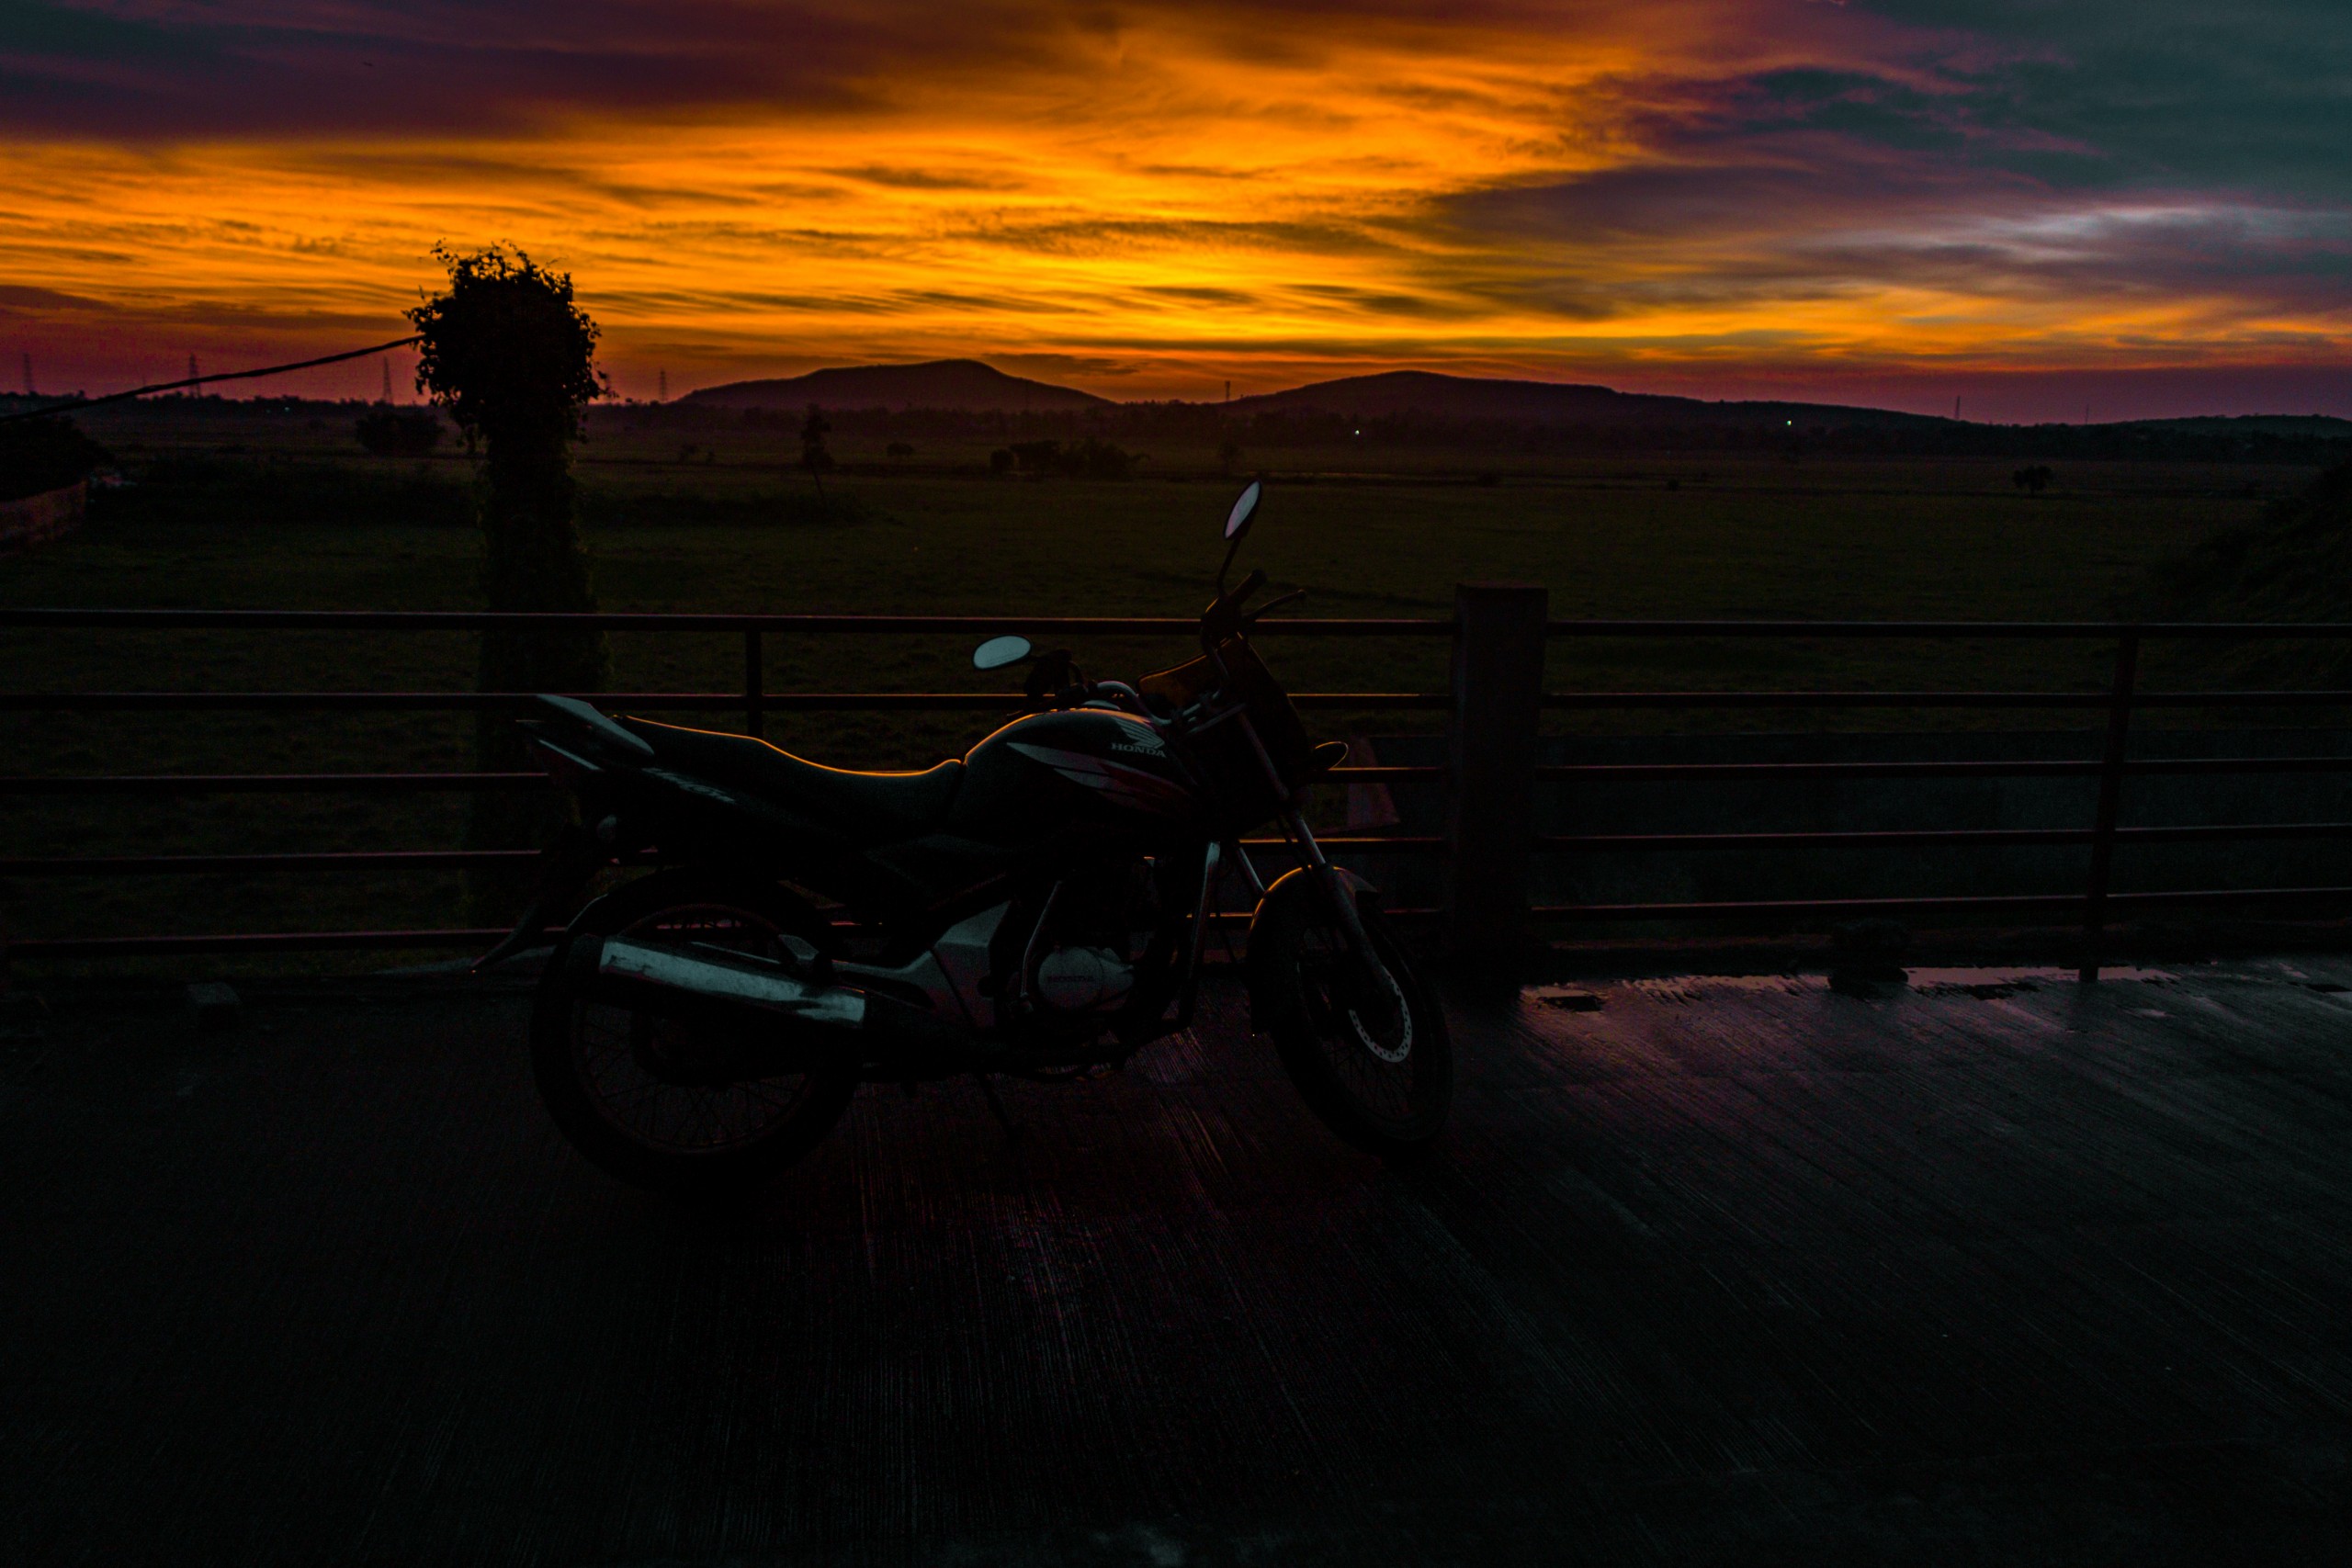 Motorcycle parked during sunset 